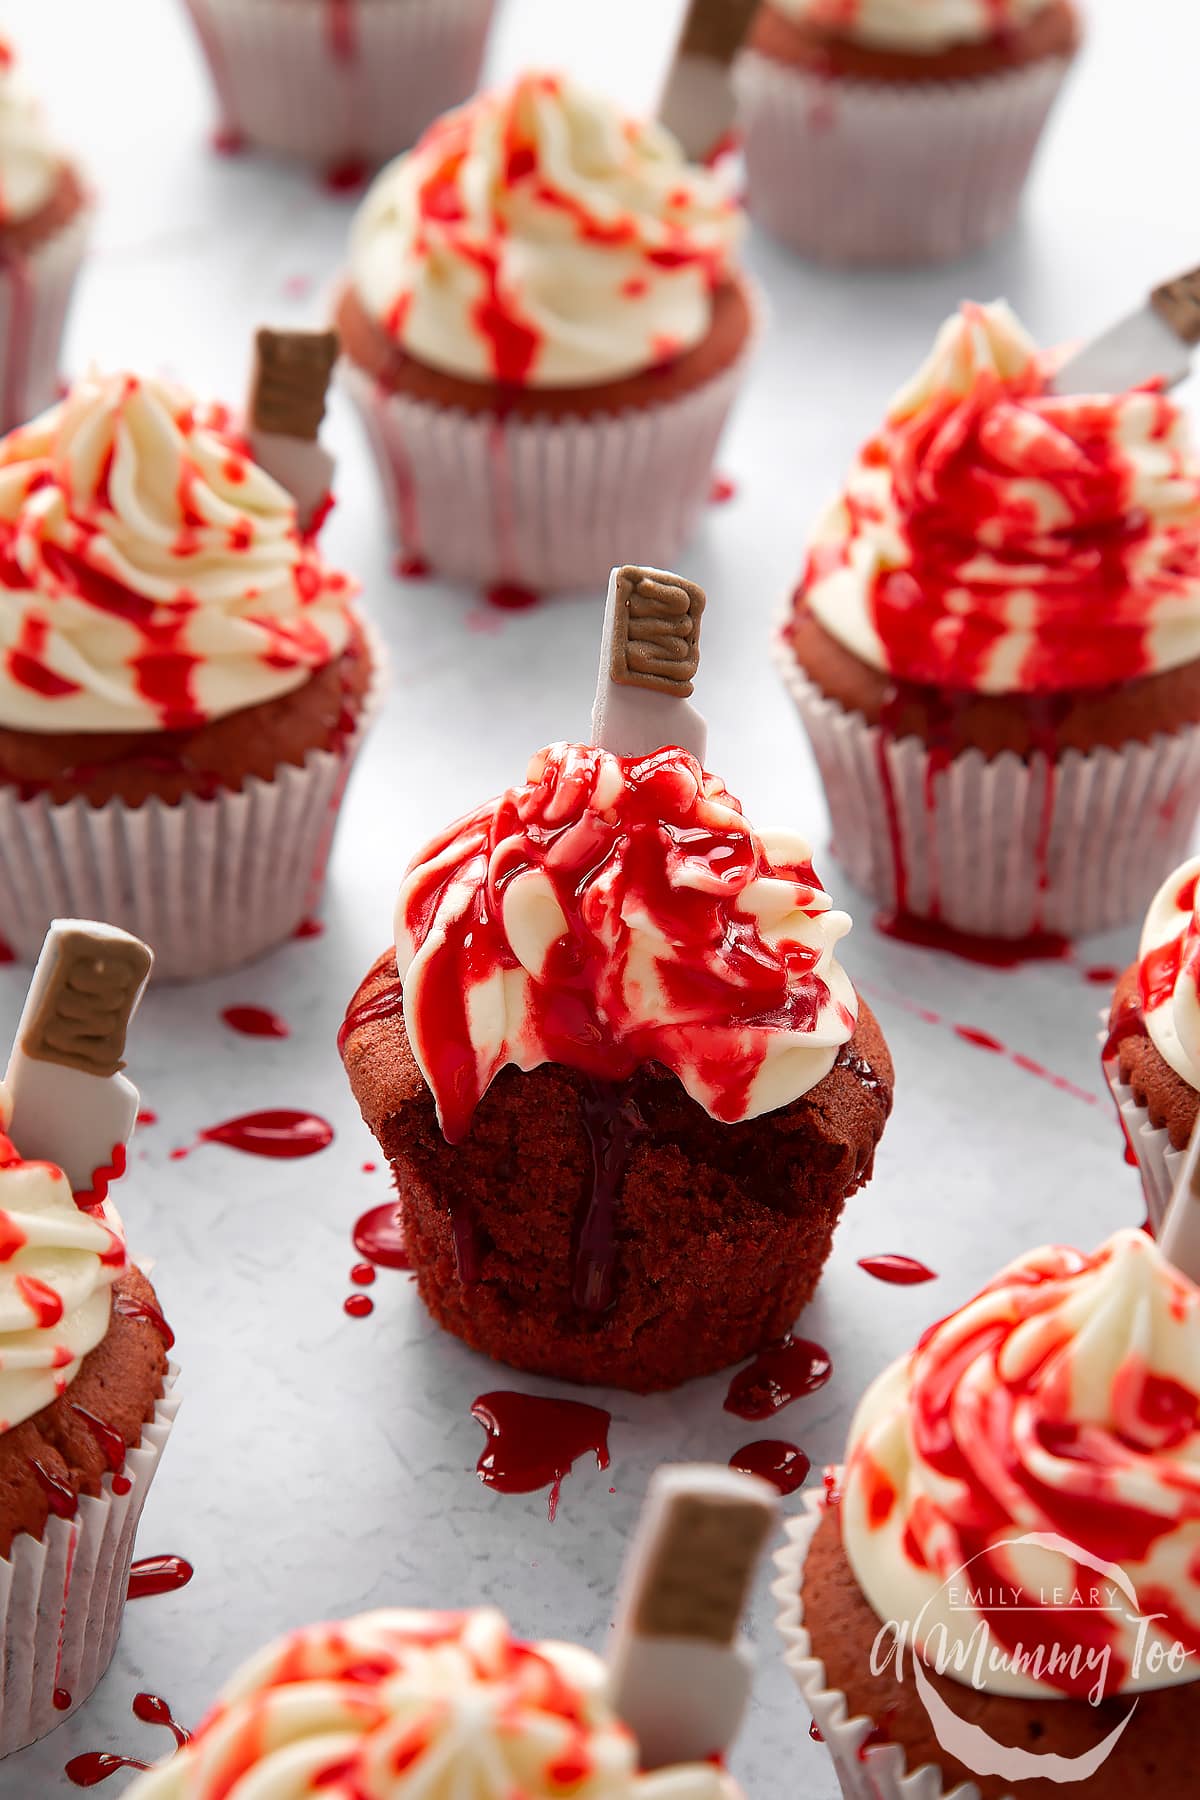 Red velvet Halloween cupcakes, spattered with red syrup. The one in the foreground has been unwrapped and has a bite out of it.